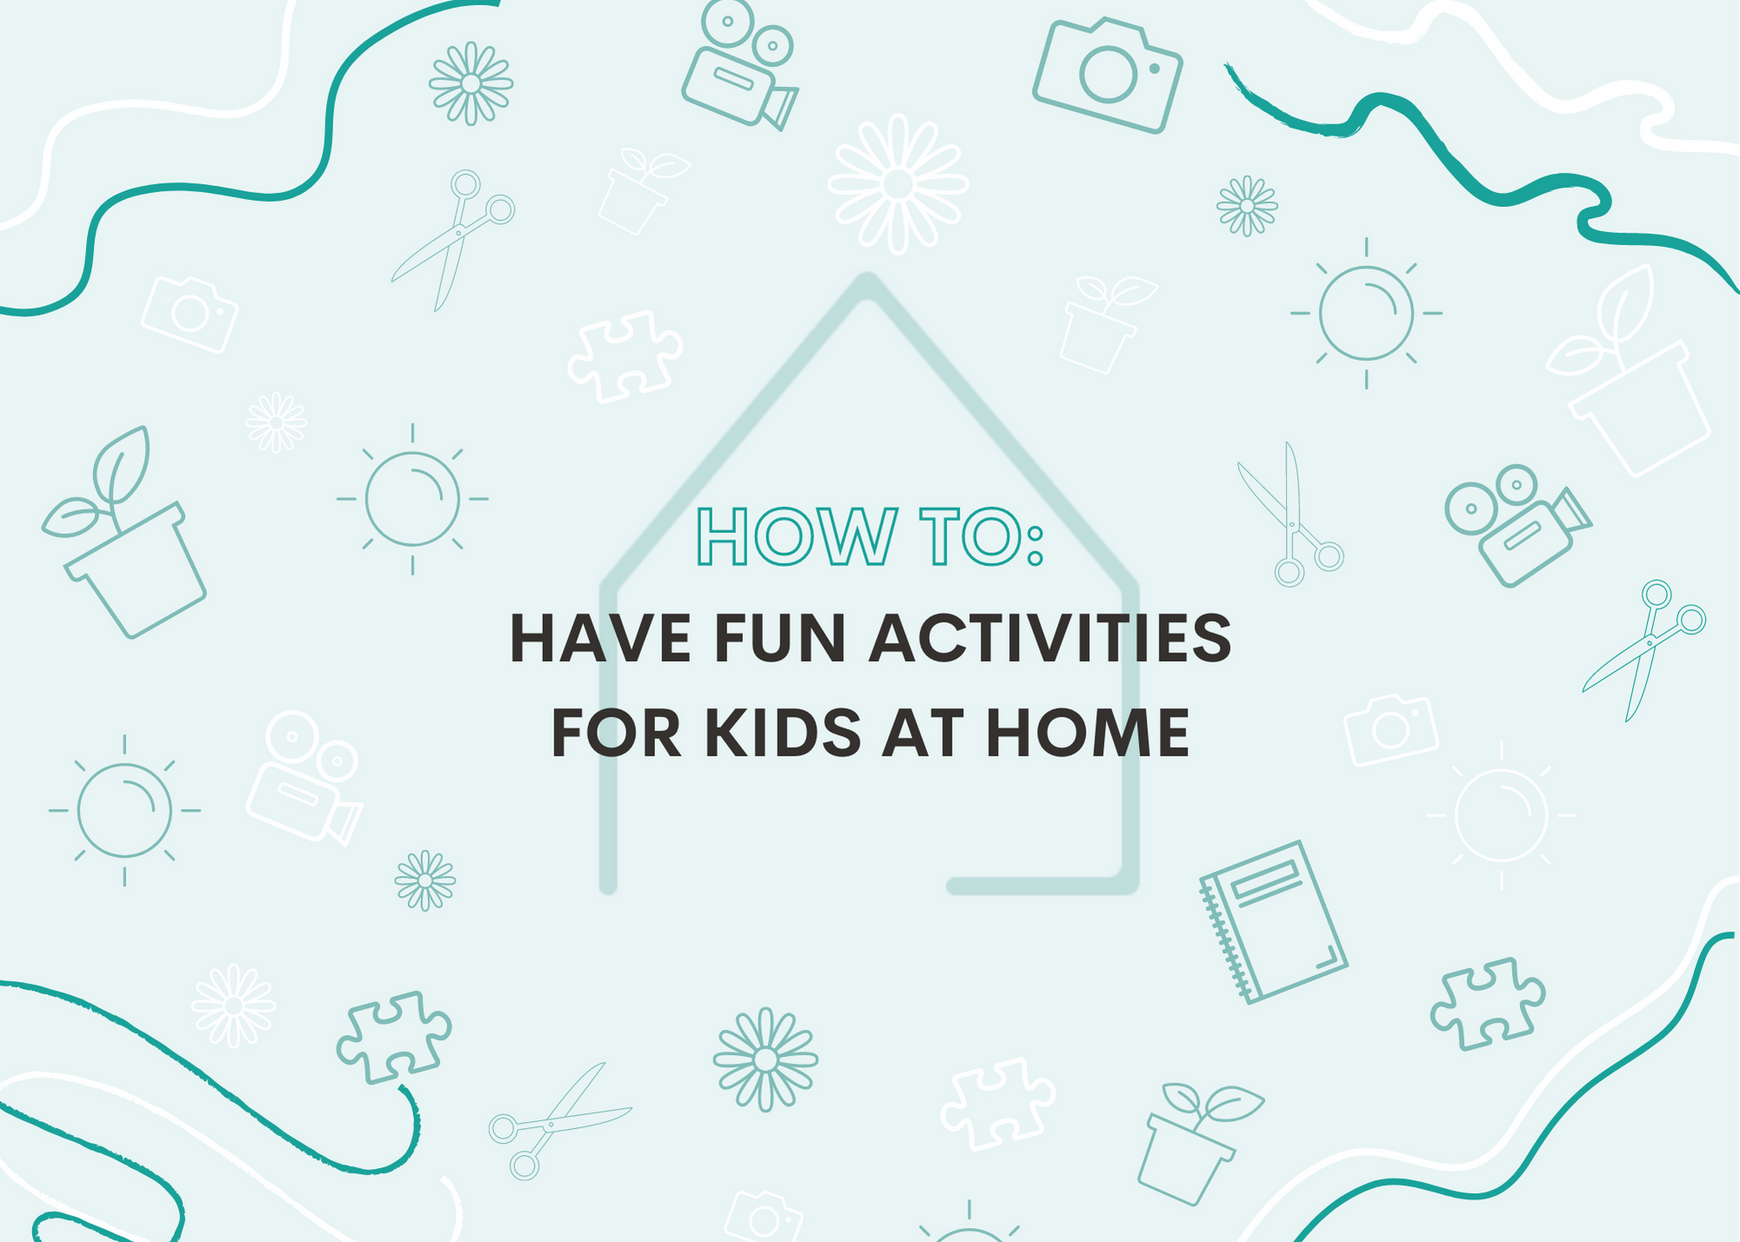 How to Have Fun Activities for Kids at Home